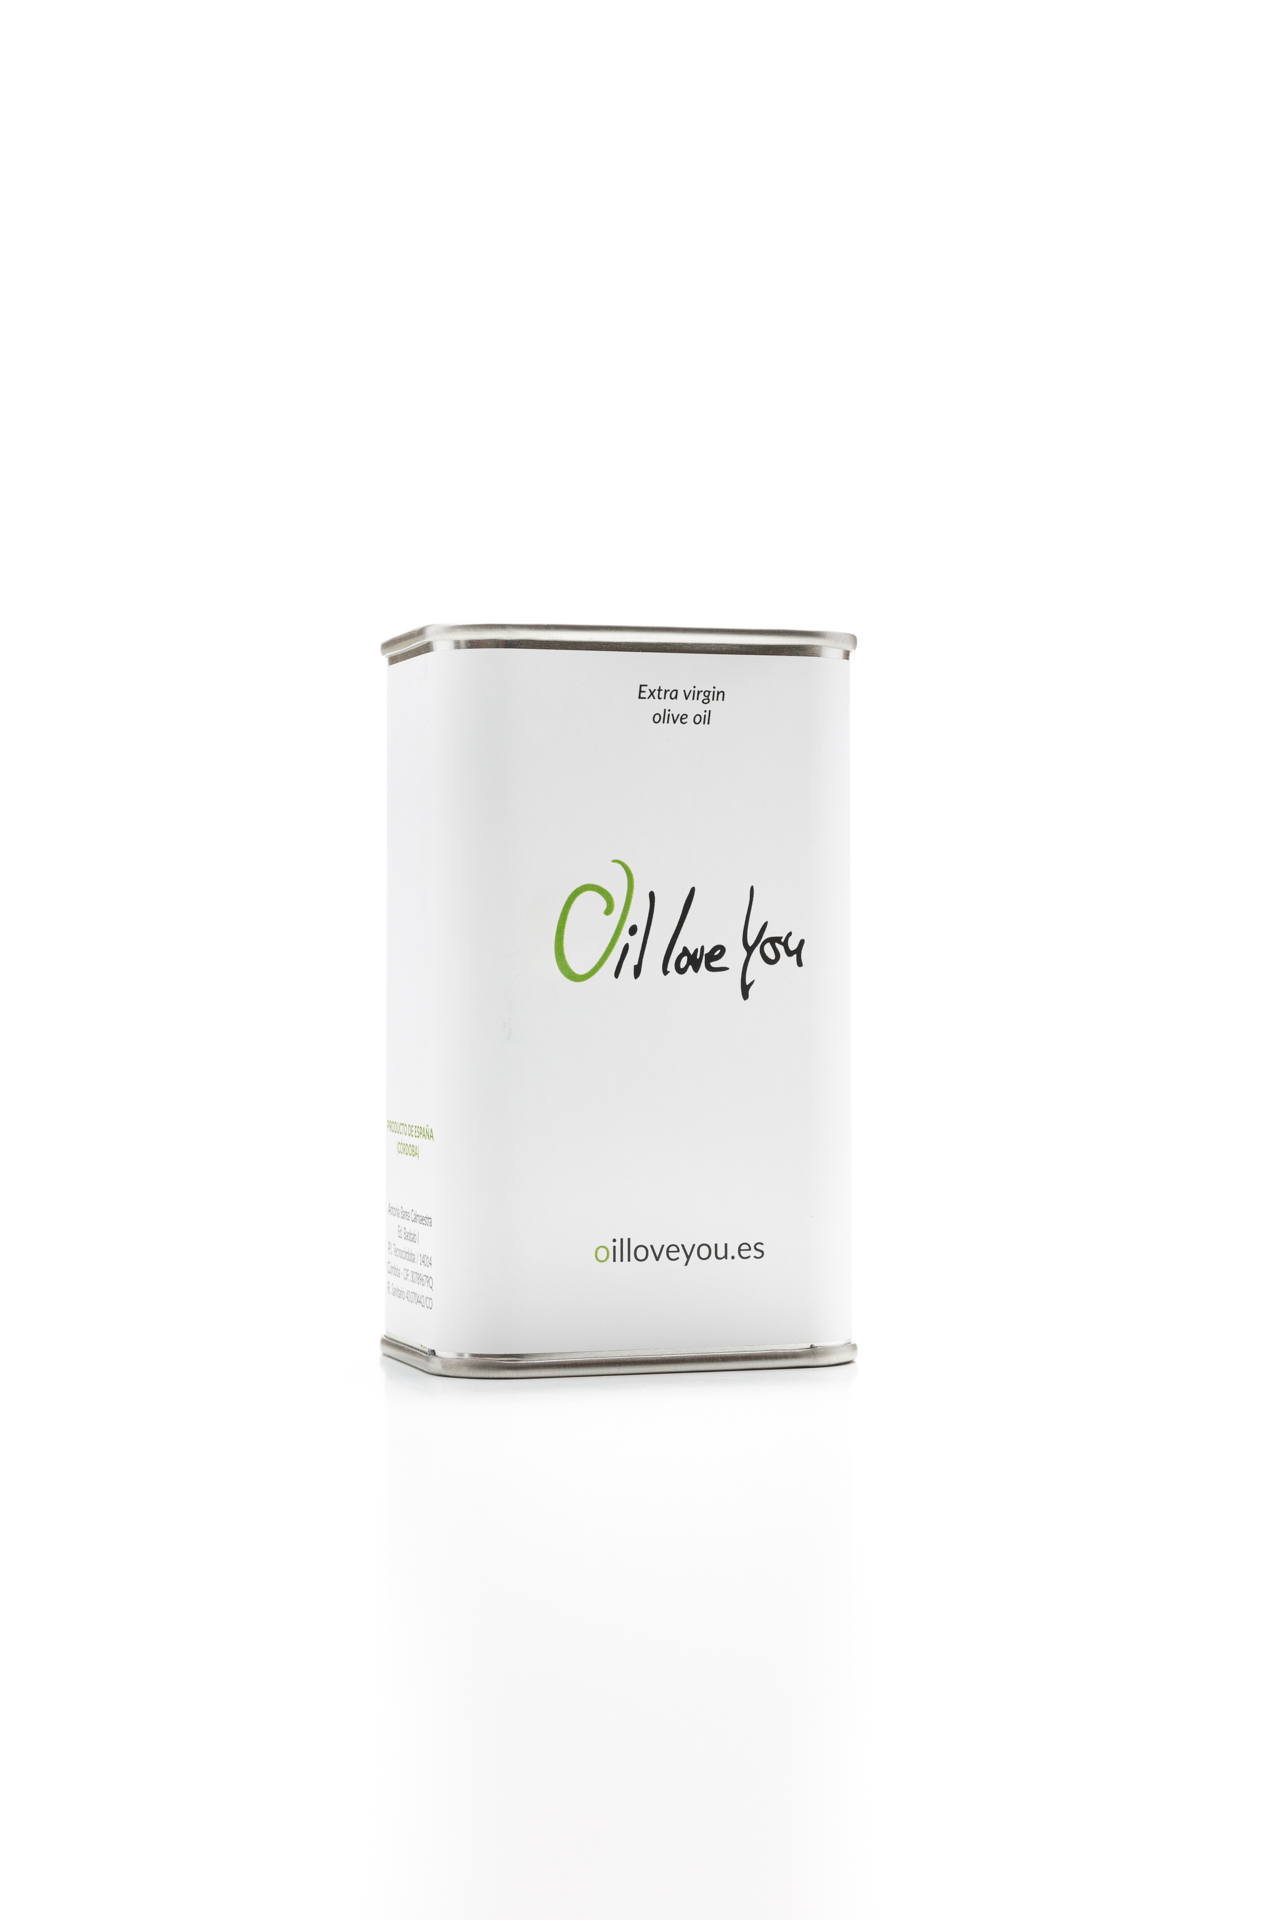 Can of EVOO Oil Love You 250 ml oilloveyou (1)